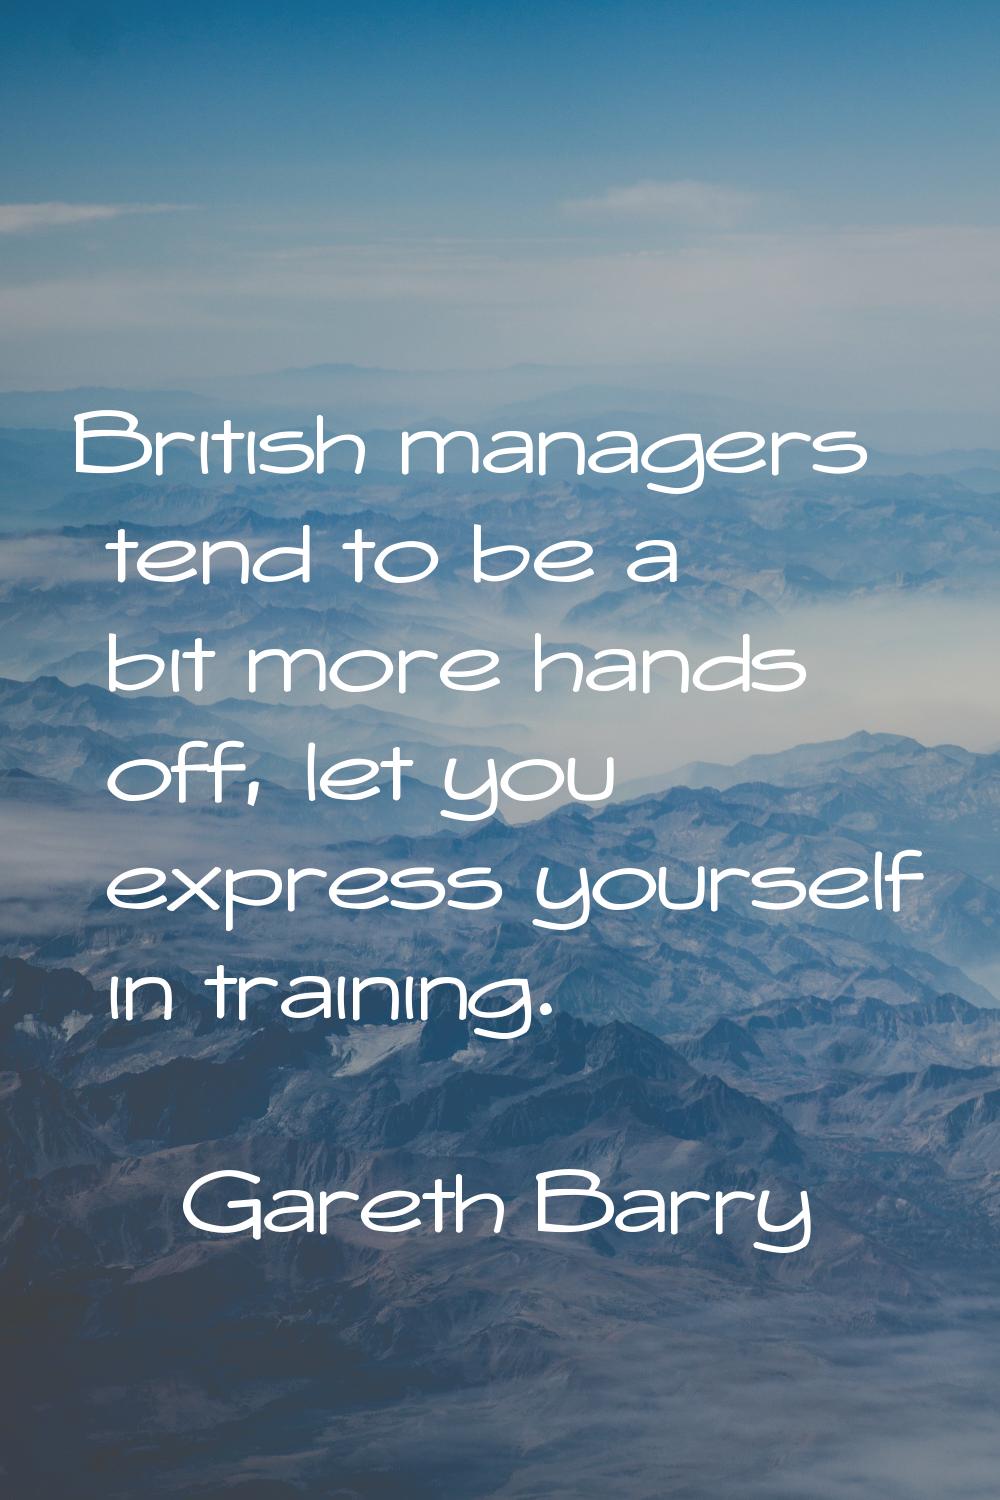 British managers tend to be a bit more hands off, let you express yourself in training.